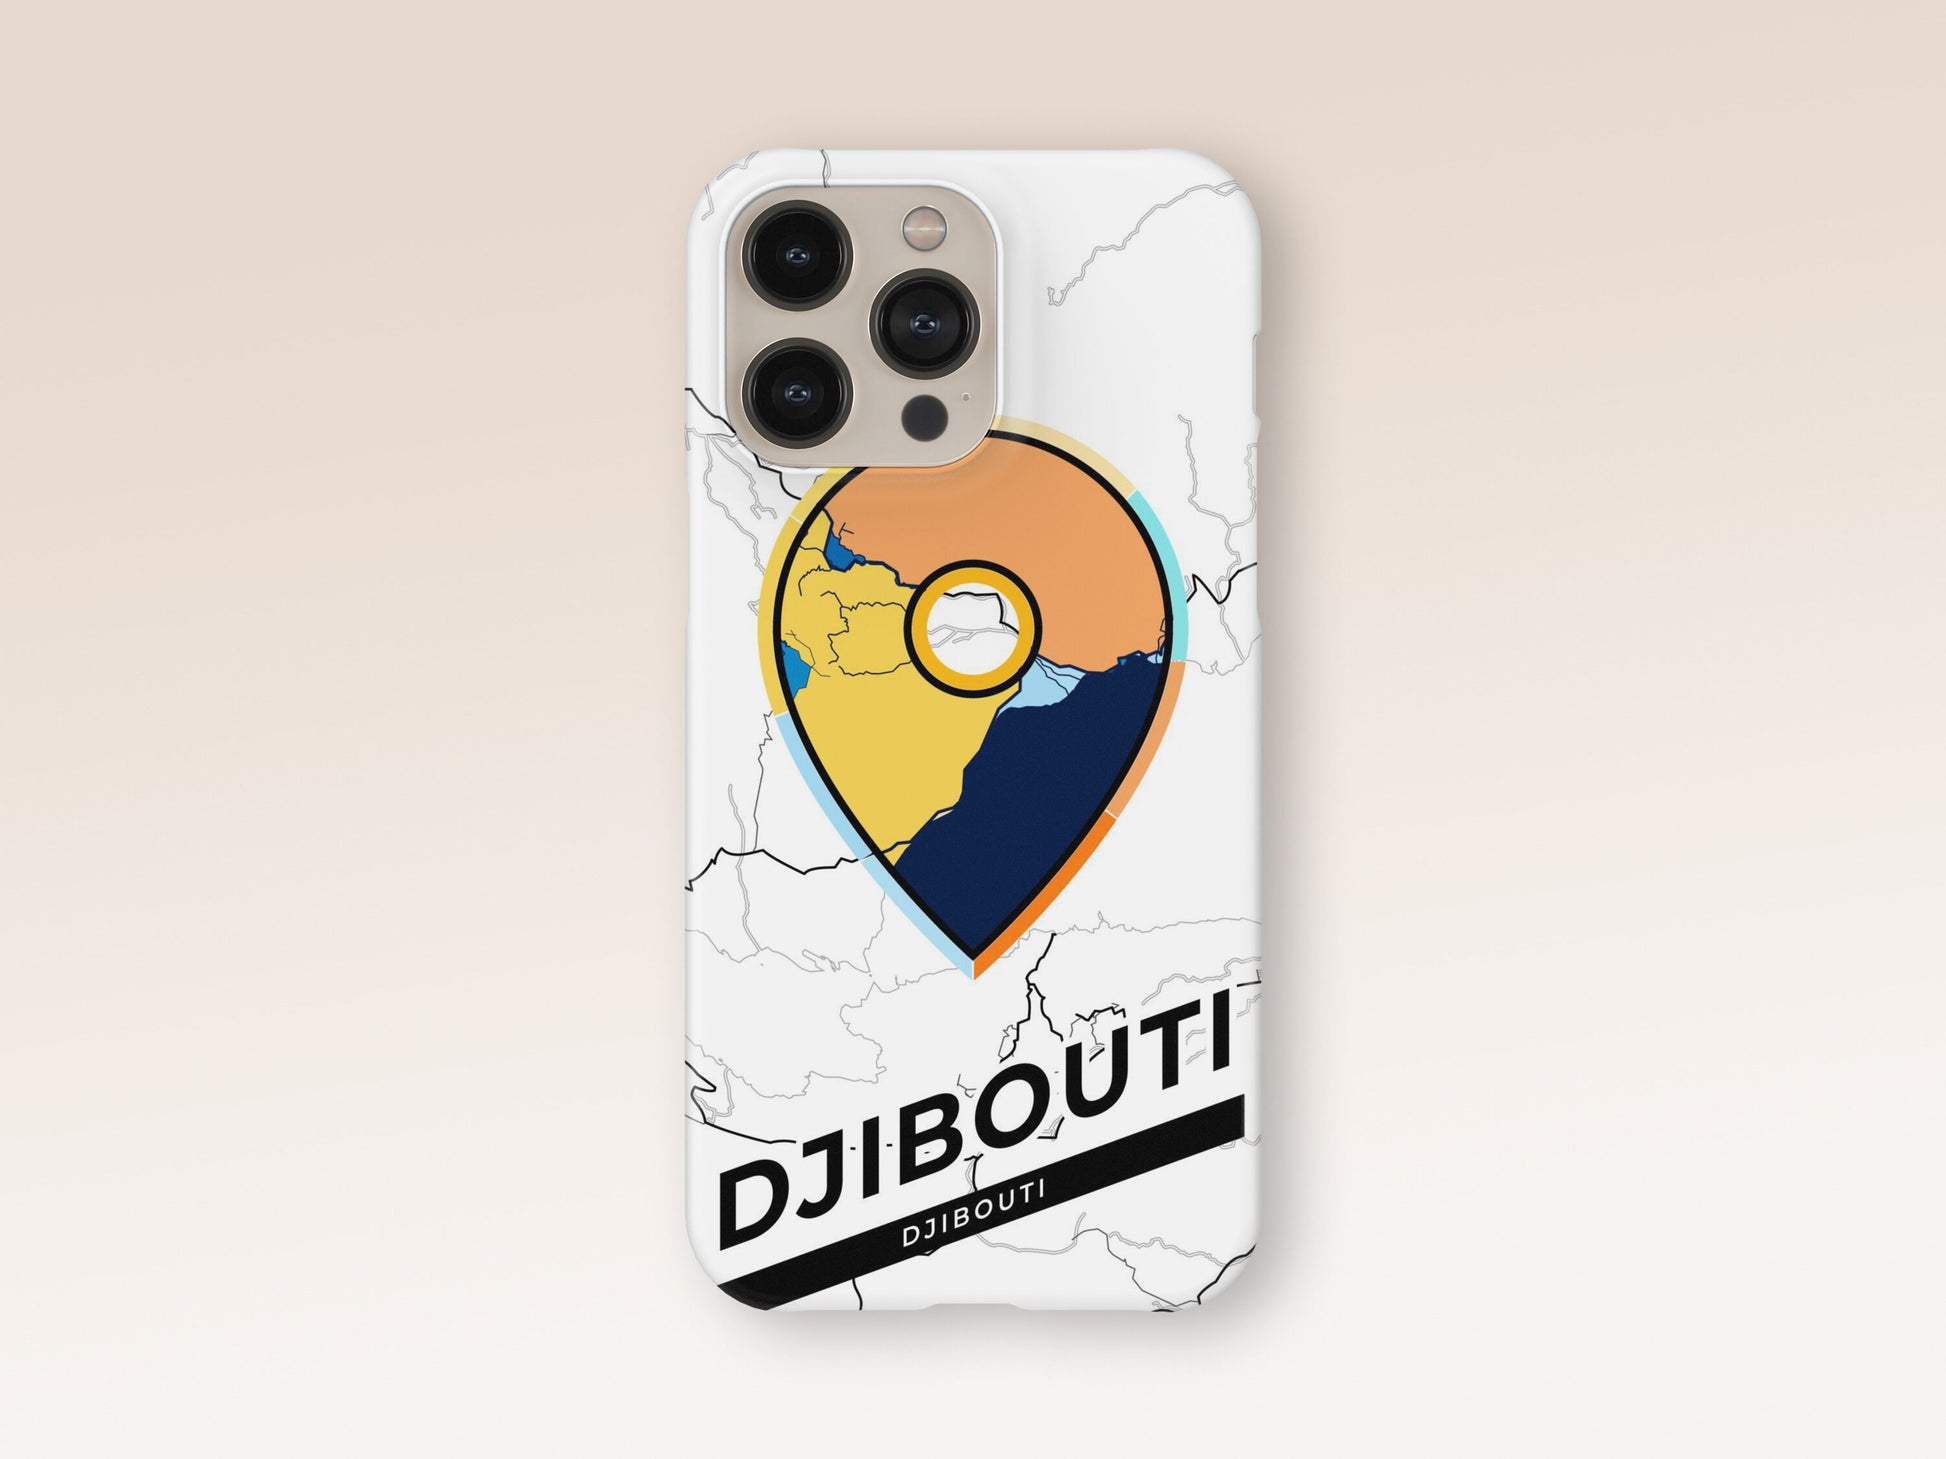 Djibouti Djibouti slim phone case with colorful icon. Birthday, wedding or housewarming gift. Couple match cases. 1